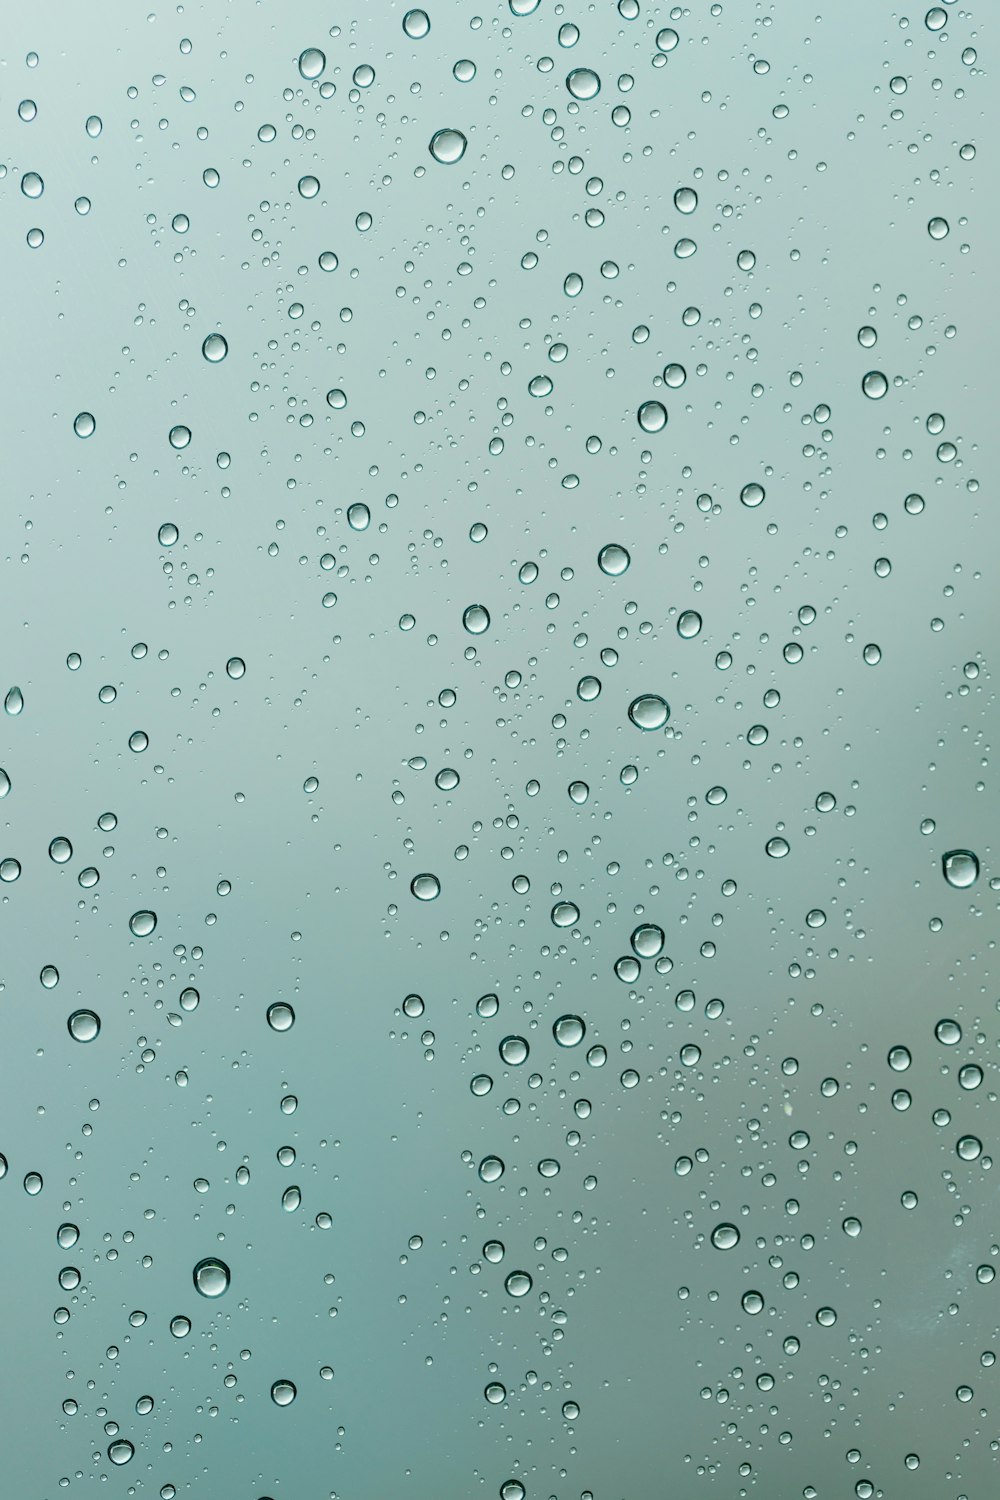 water droplets on glass panel